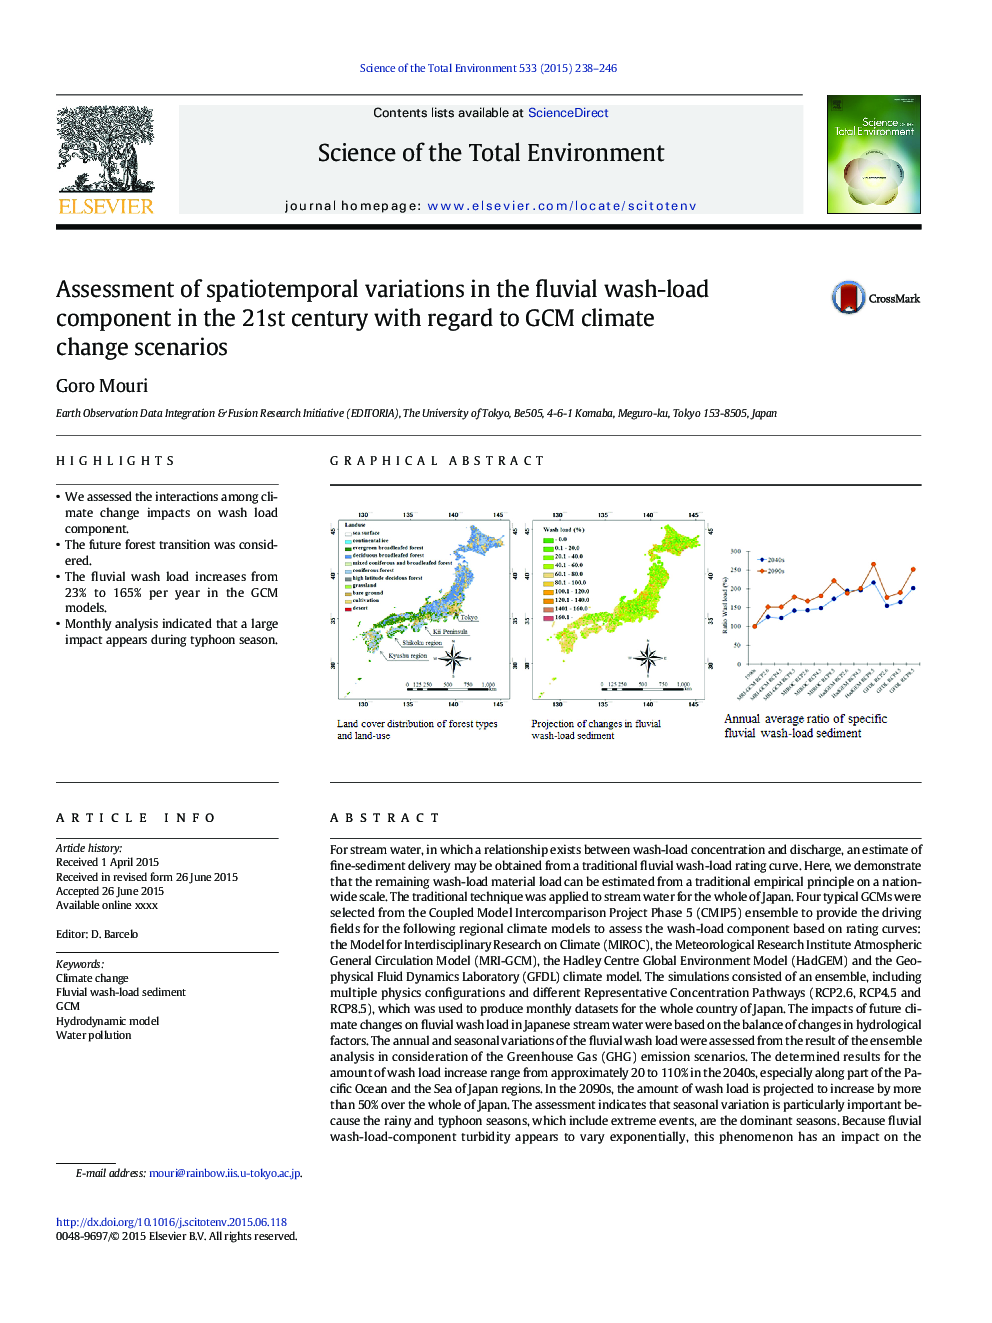 Assessment of spatiotemporal variations in the fluvial wash-load component in the 21st century with regard to GCM climate change scenarios